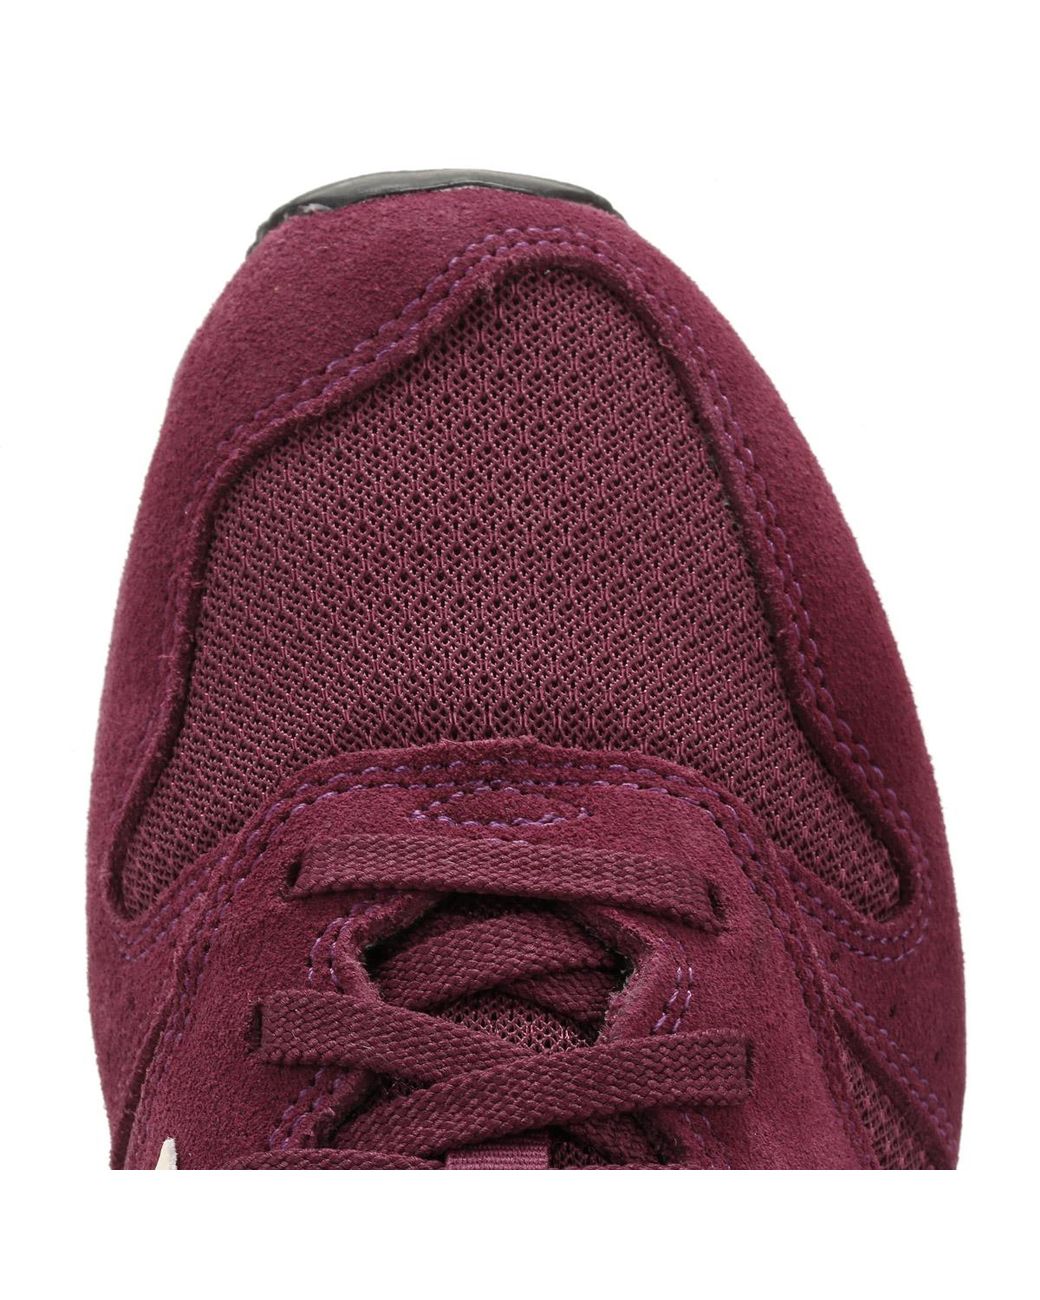 New Balance Womens Burgundy Suede 373 Trainers in Purple | Lyst UK